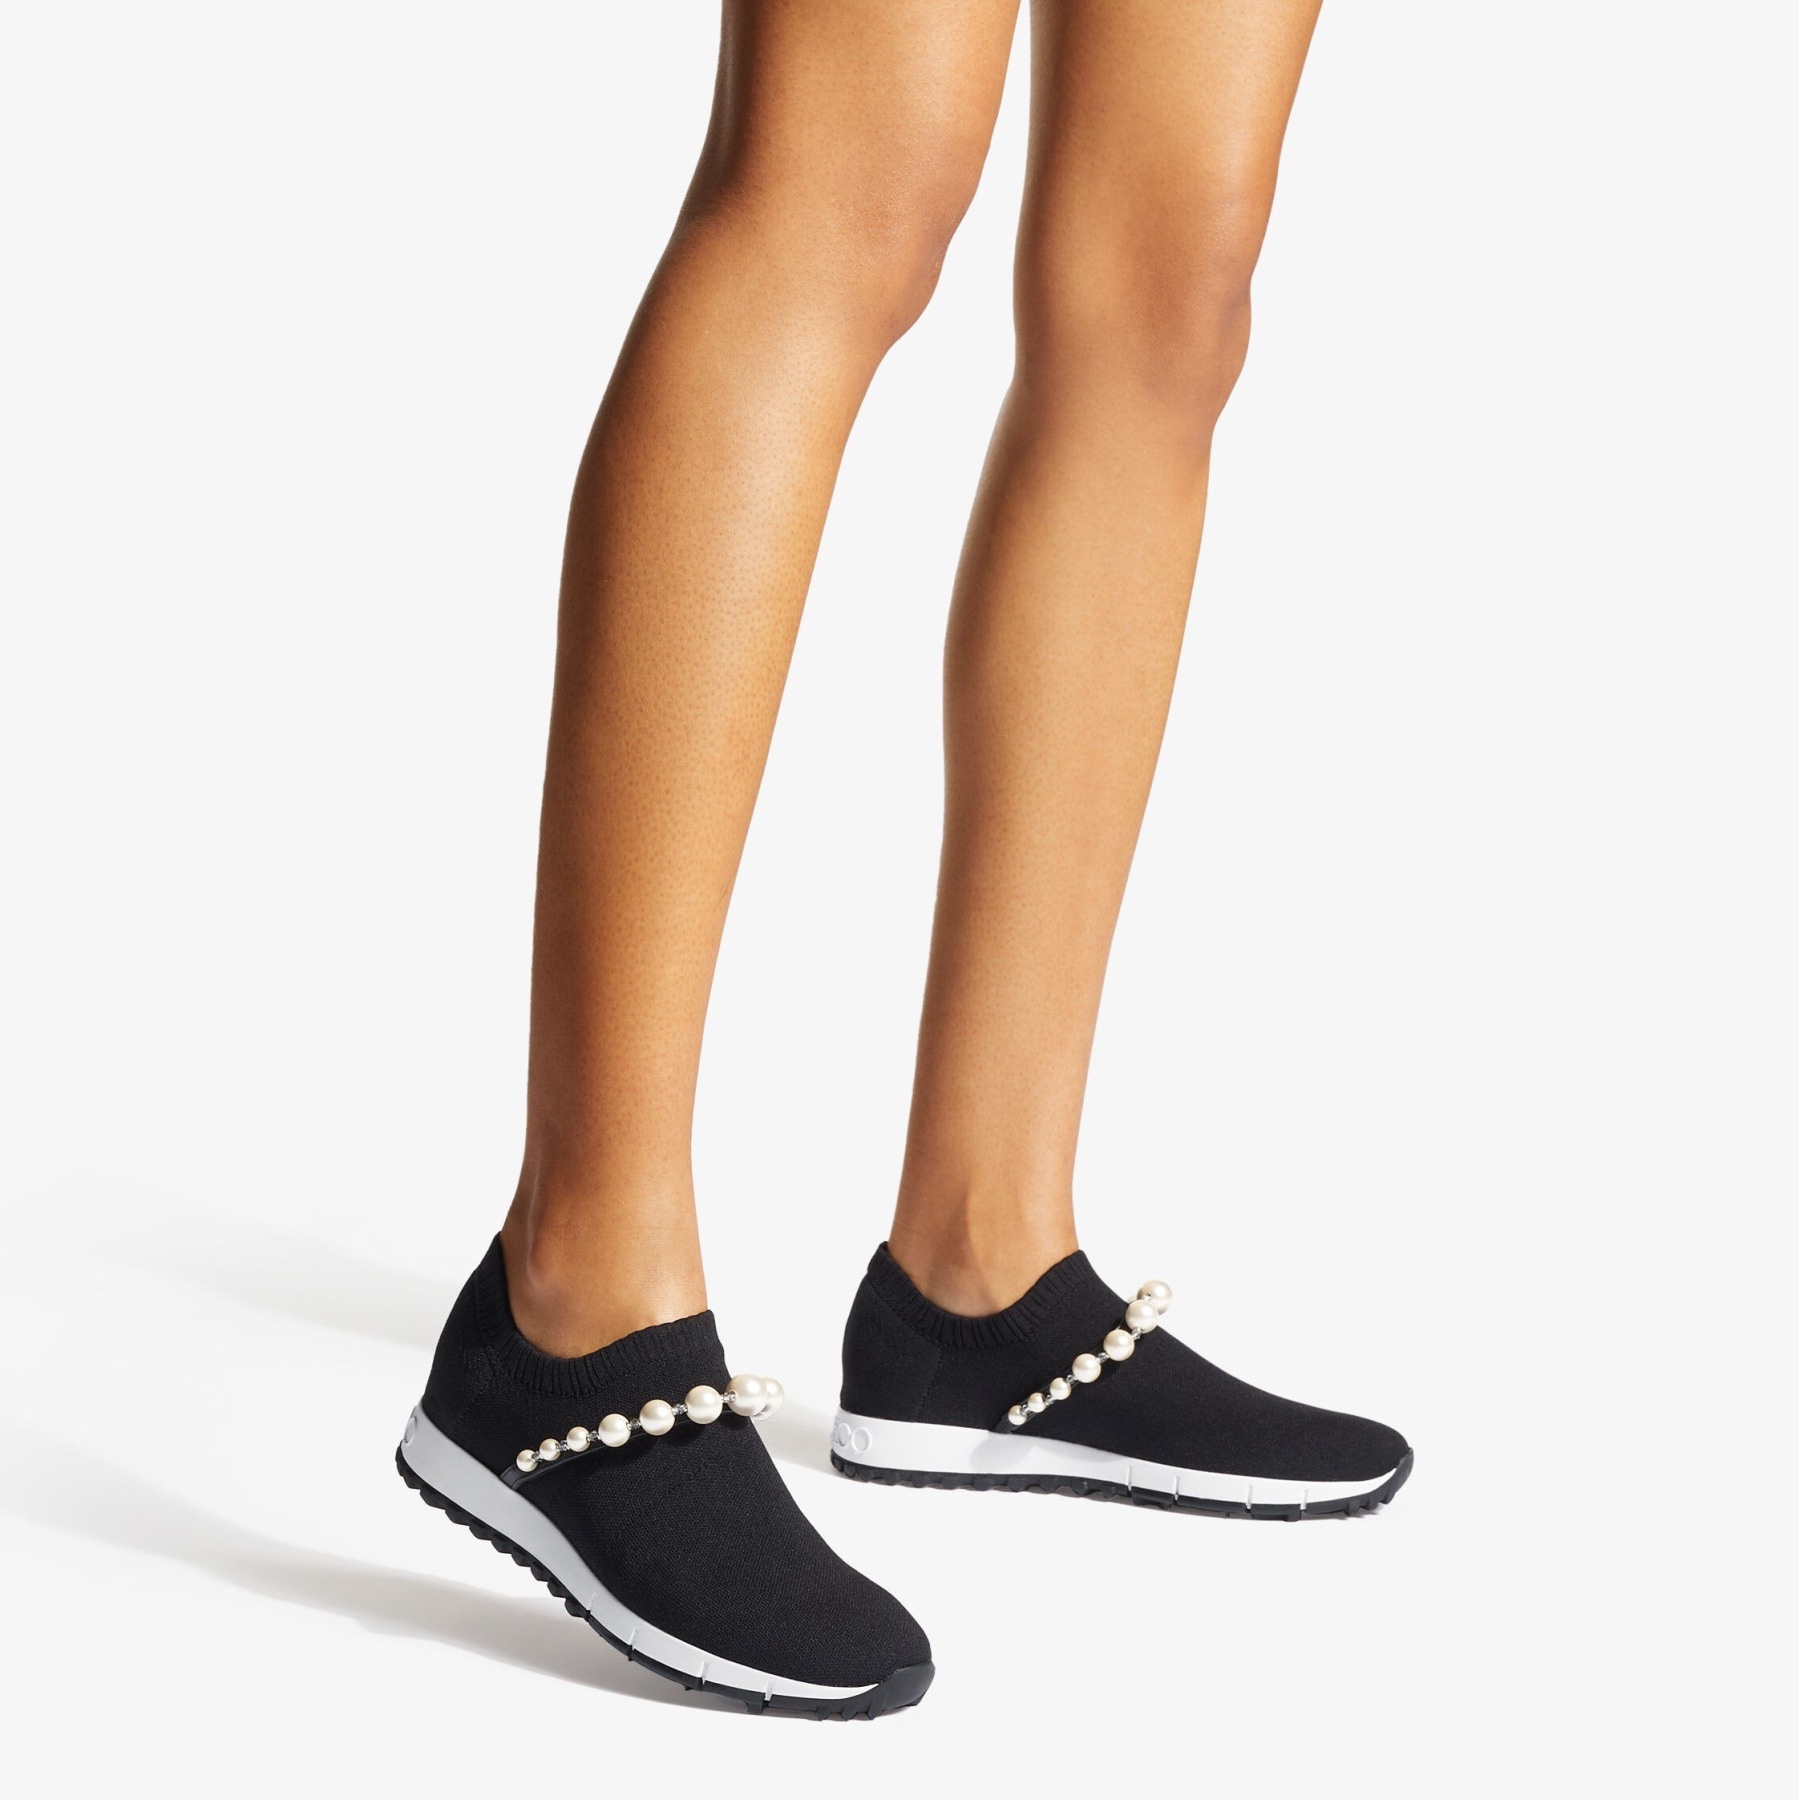 Venice
Black Knit Trainers with Pearls - 2